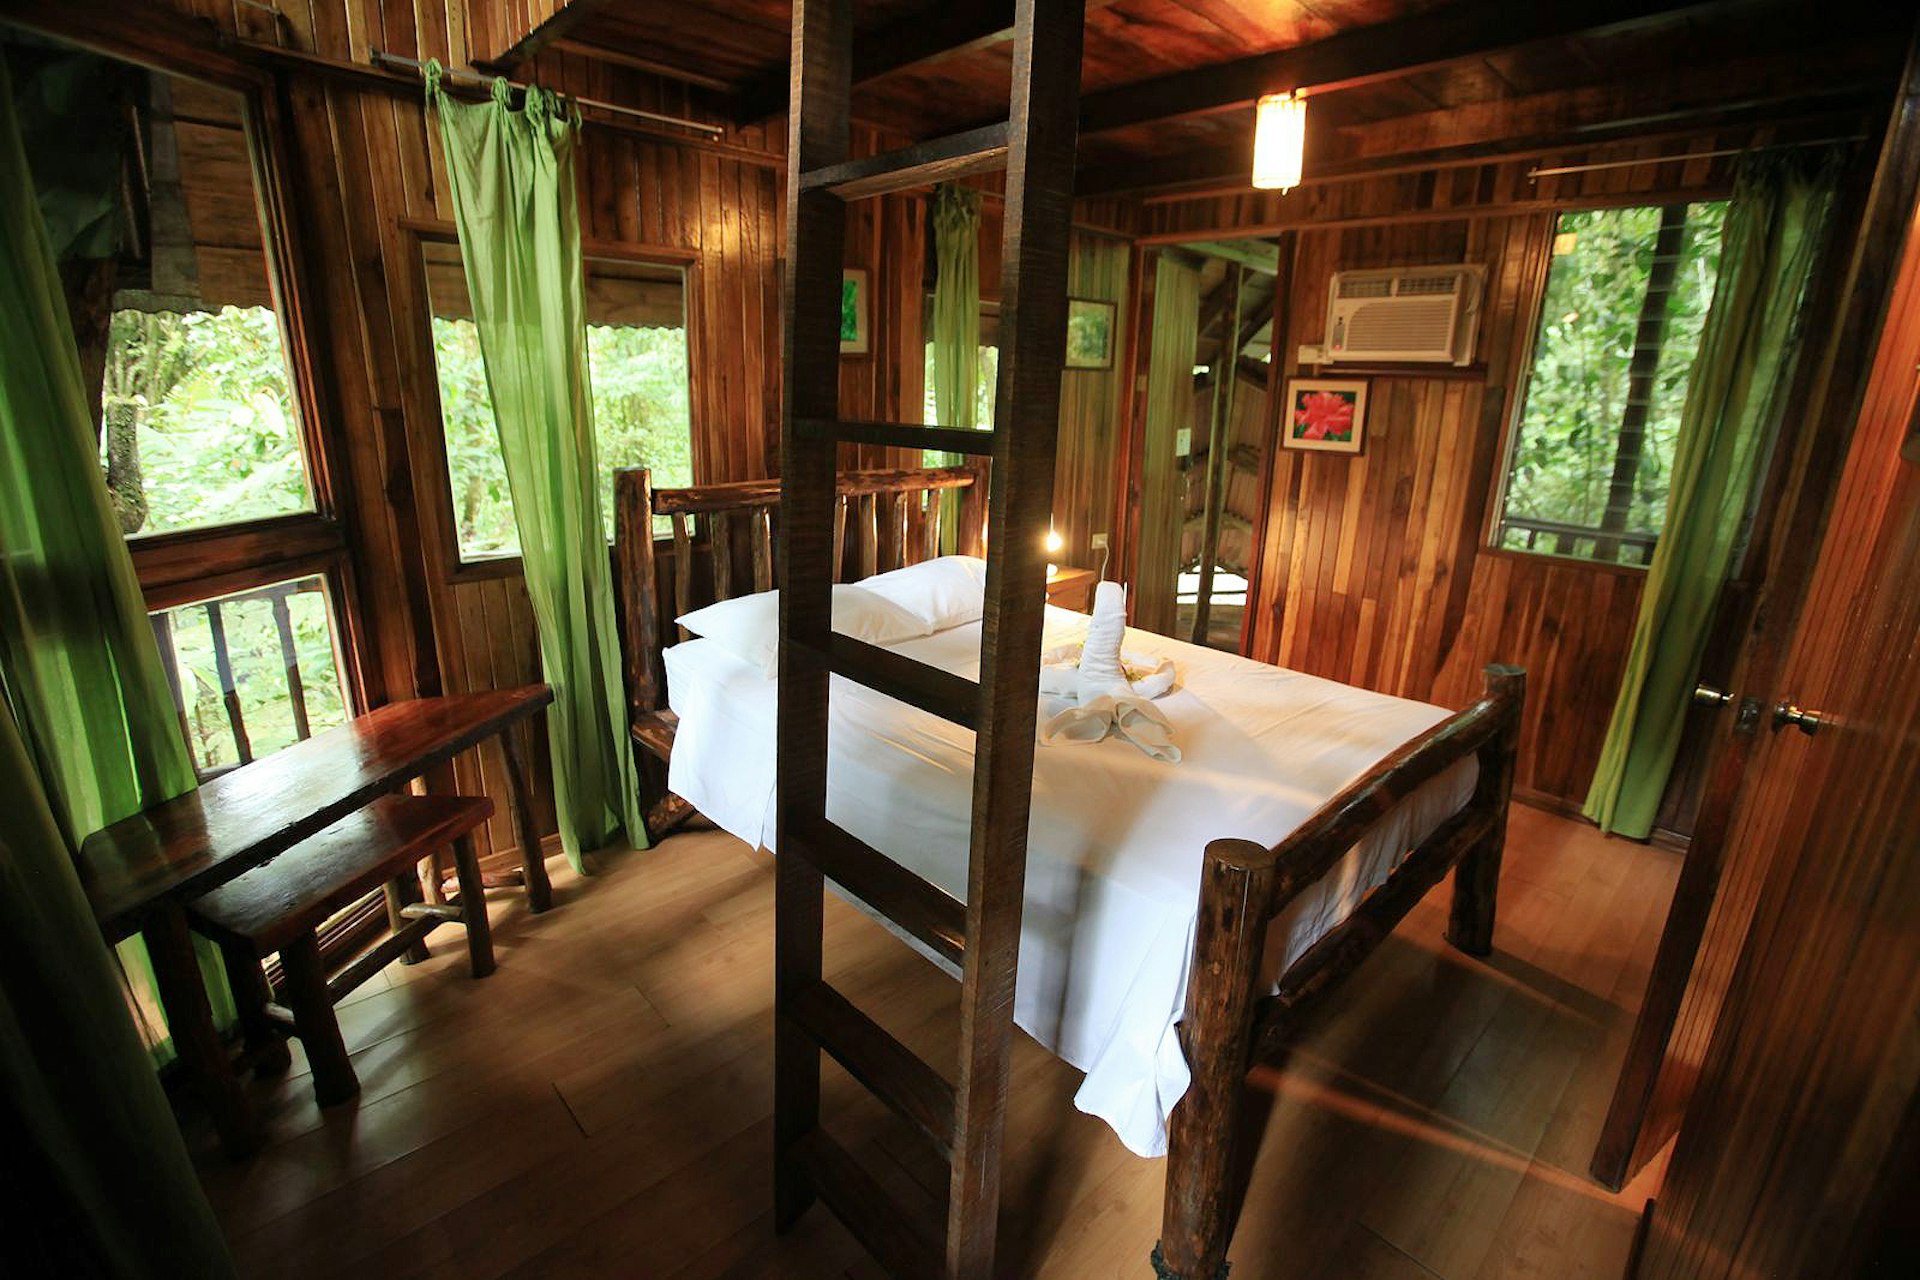 Interior of Tree Houses Hotel in Costa Rica